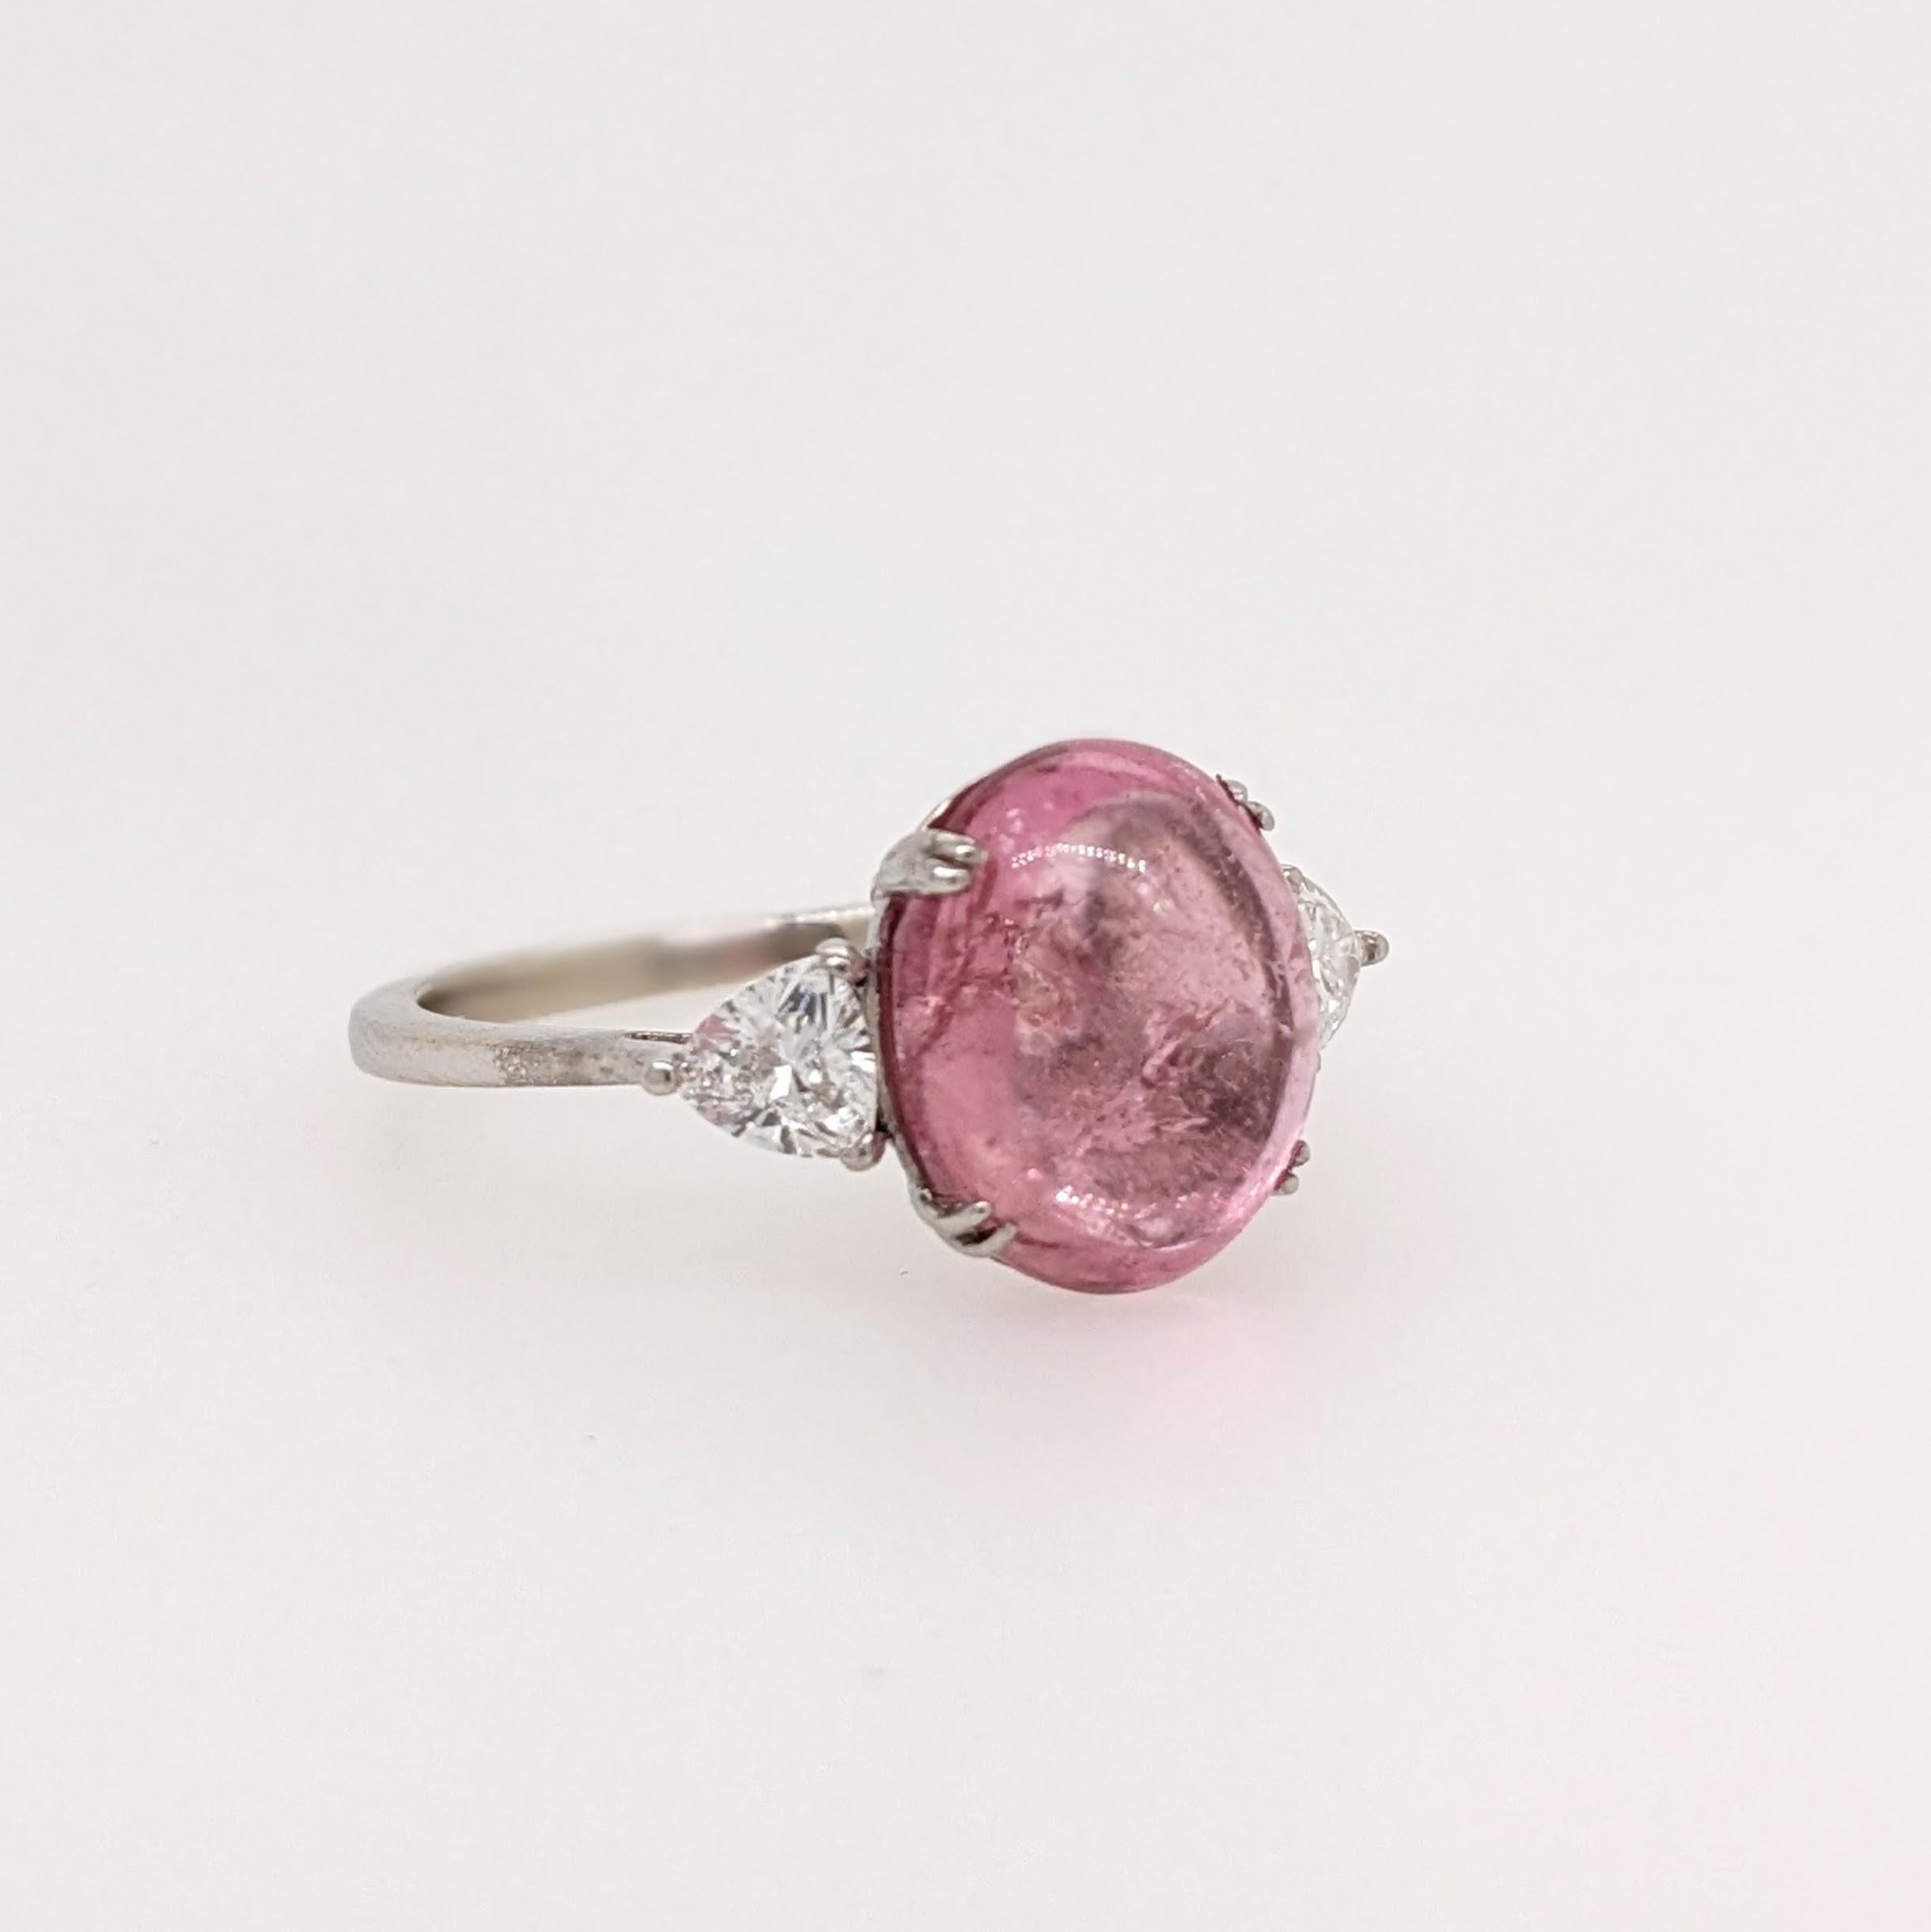 A one off ring featuring a cabochon pink rubellite tourmaline accented with trillion lab diamonds. A beautiful collection piece that is perfect for every occasion. 💕

Specifications:

Item Type: Ring
Center Stone: Tourmaline
Treatment: